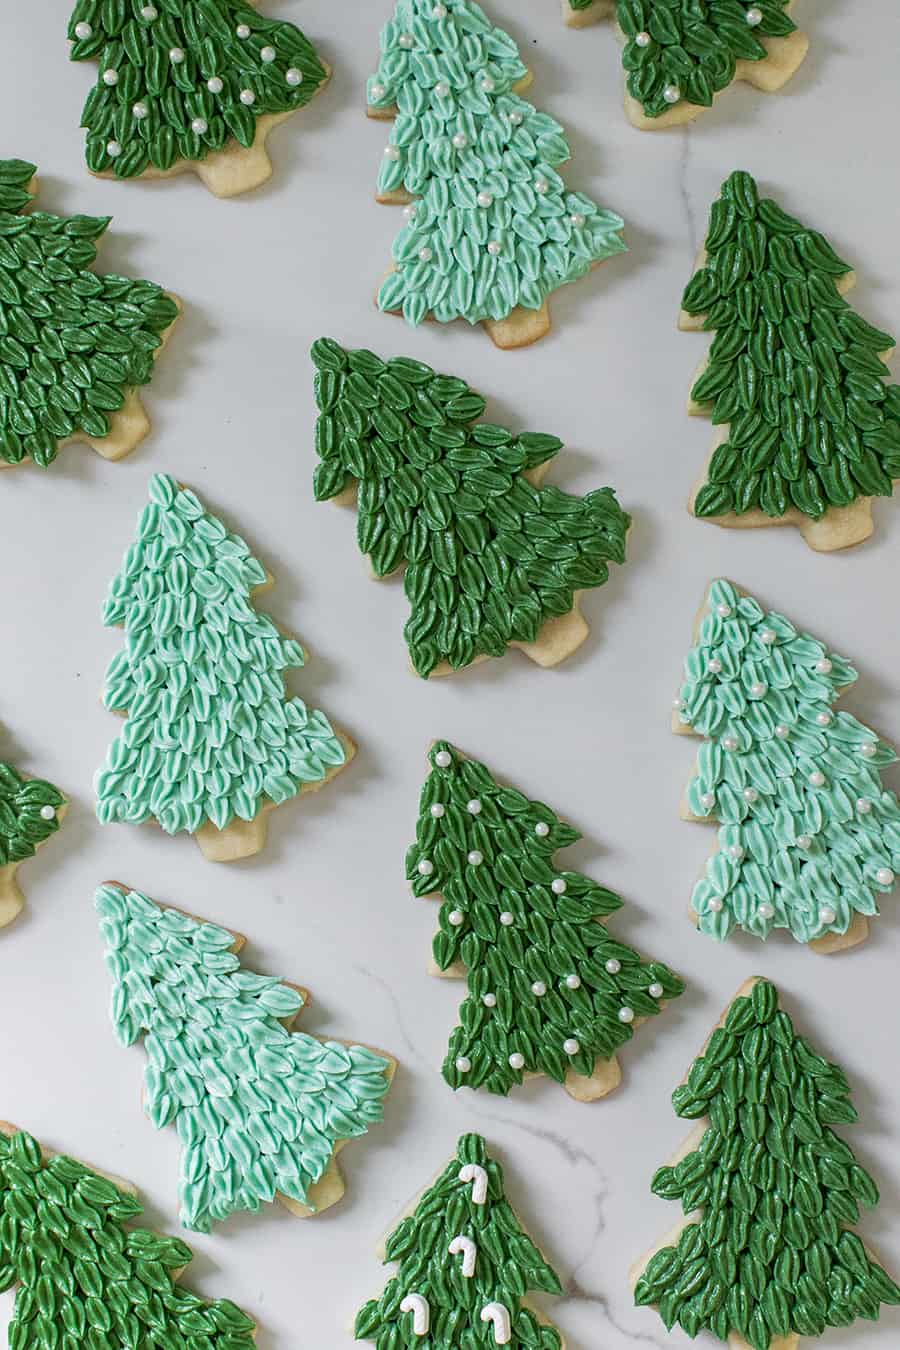 Christmas sugar cookies with green frosting.